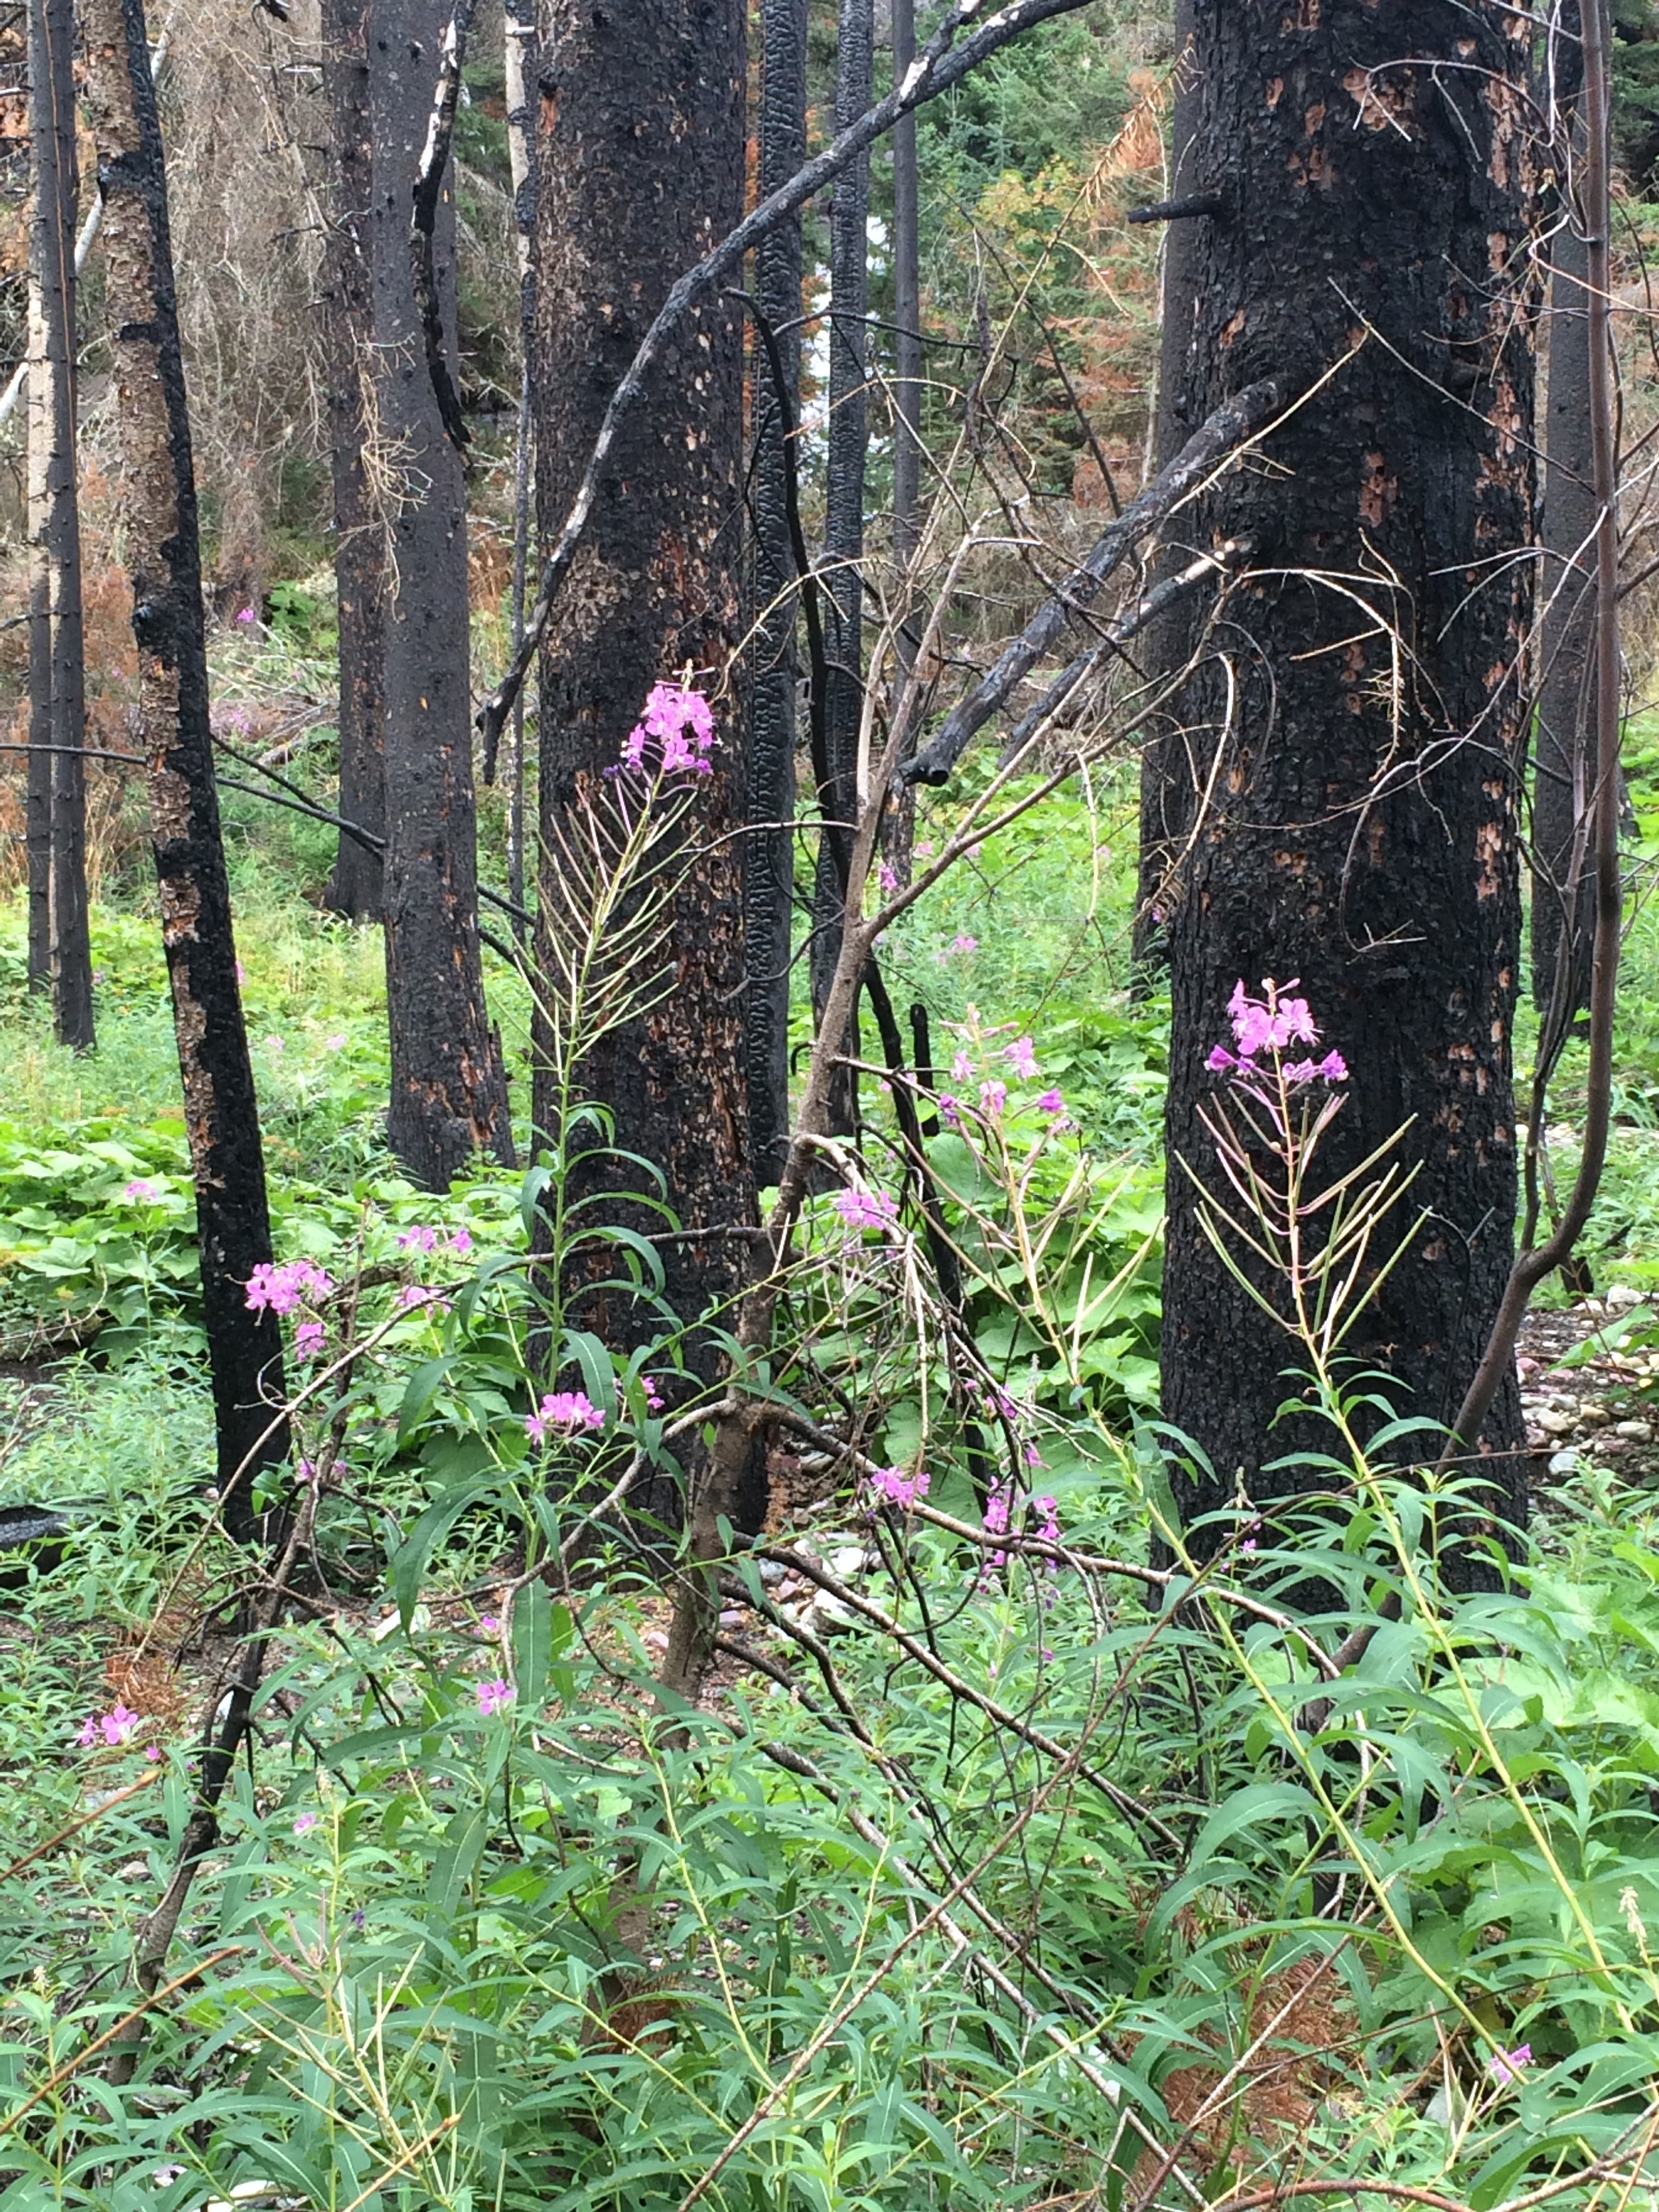 Wildfire Blooms